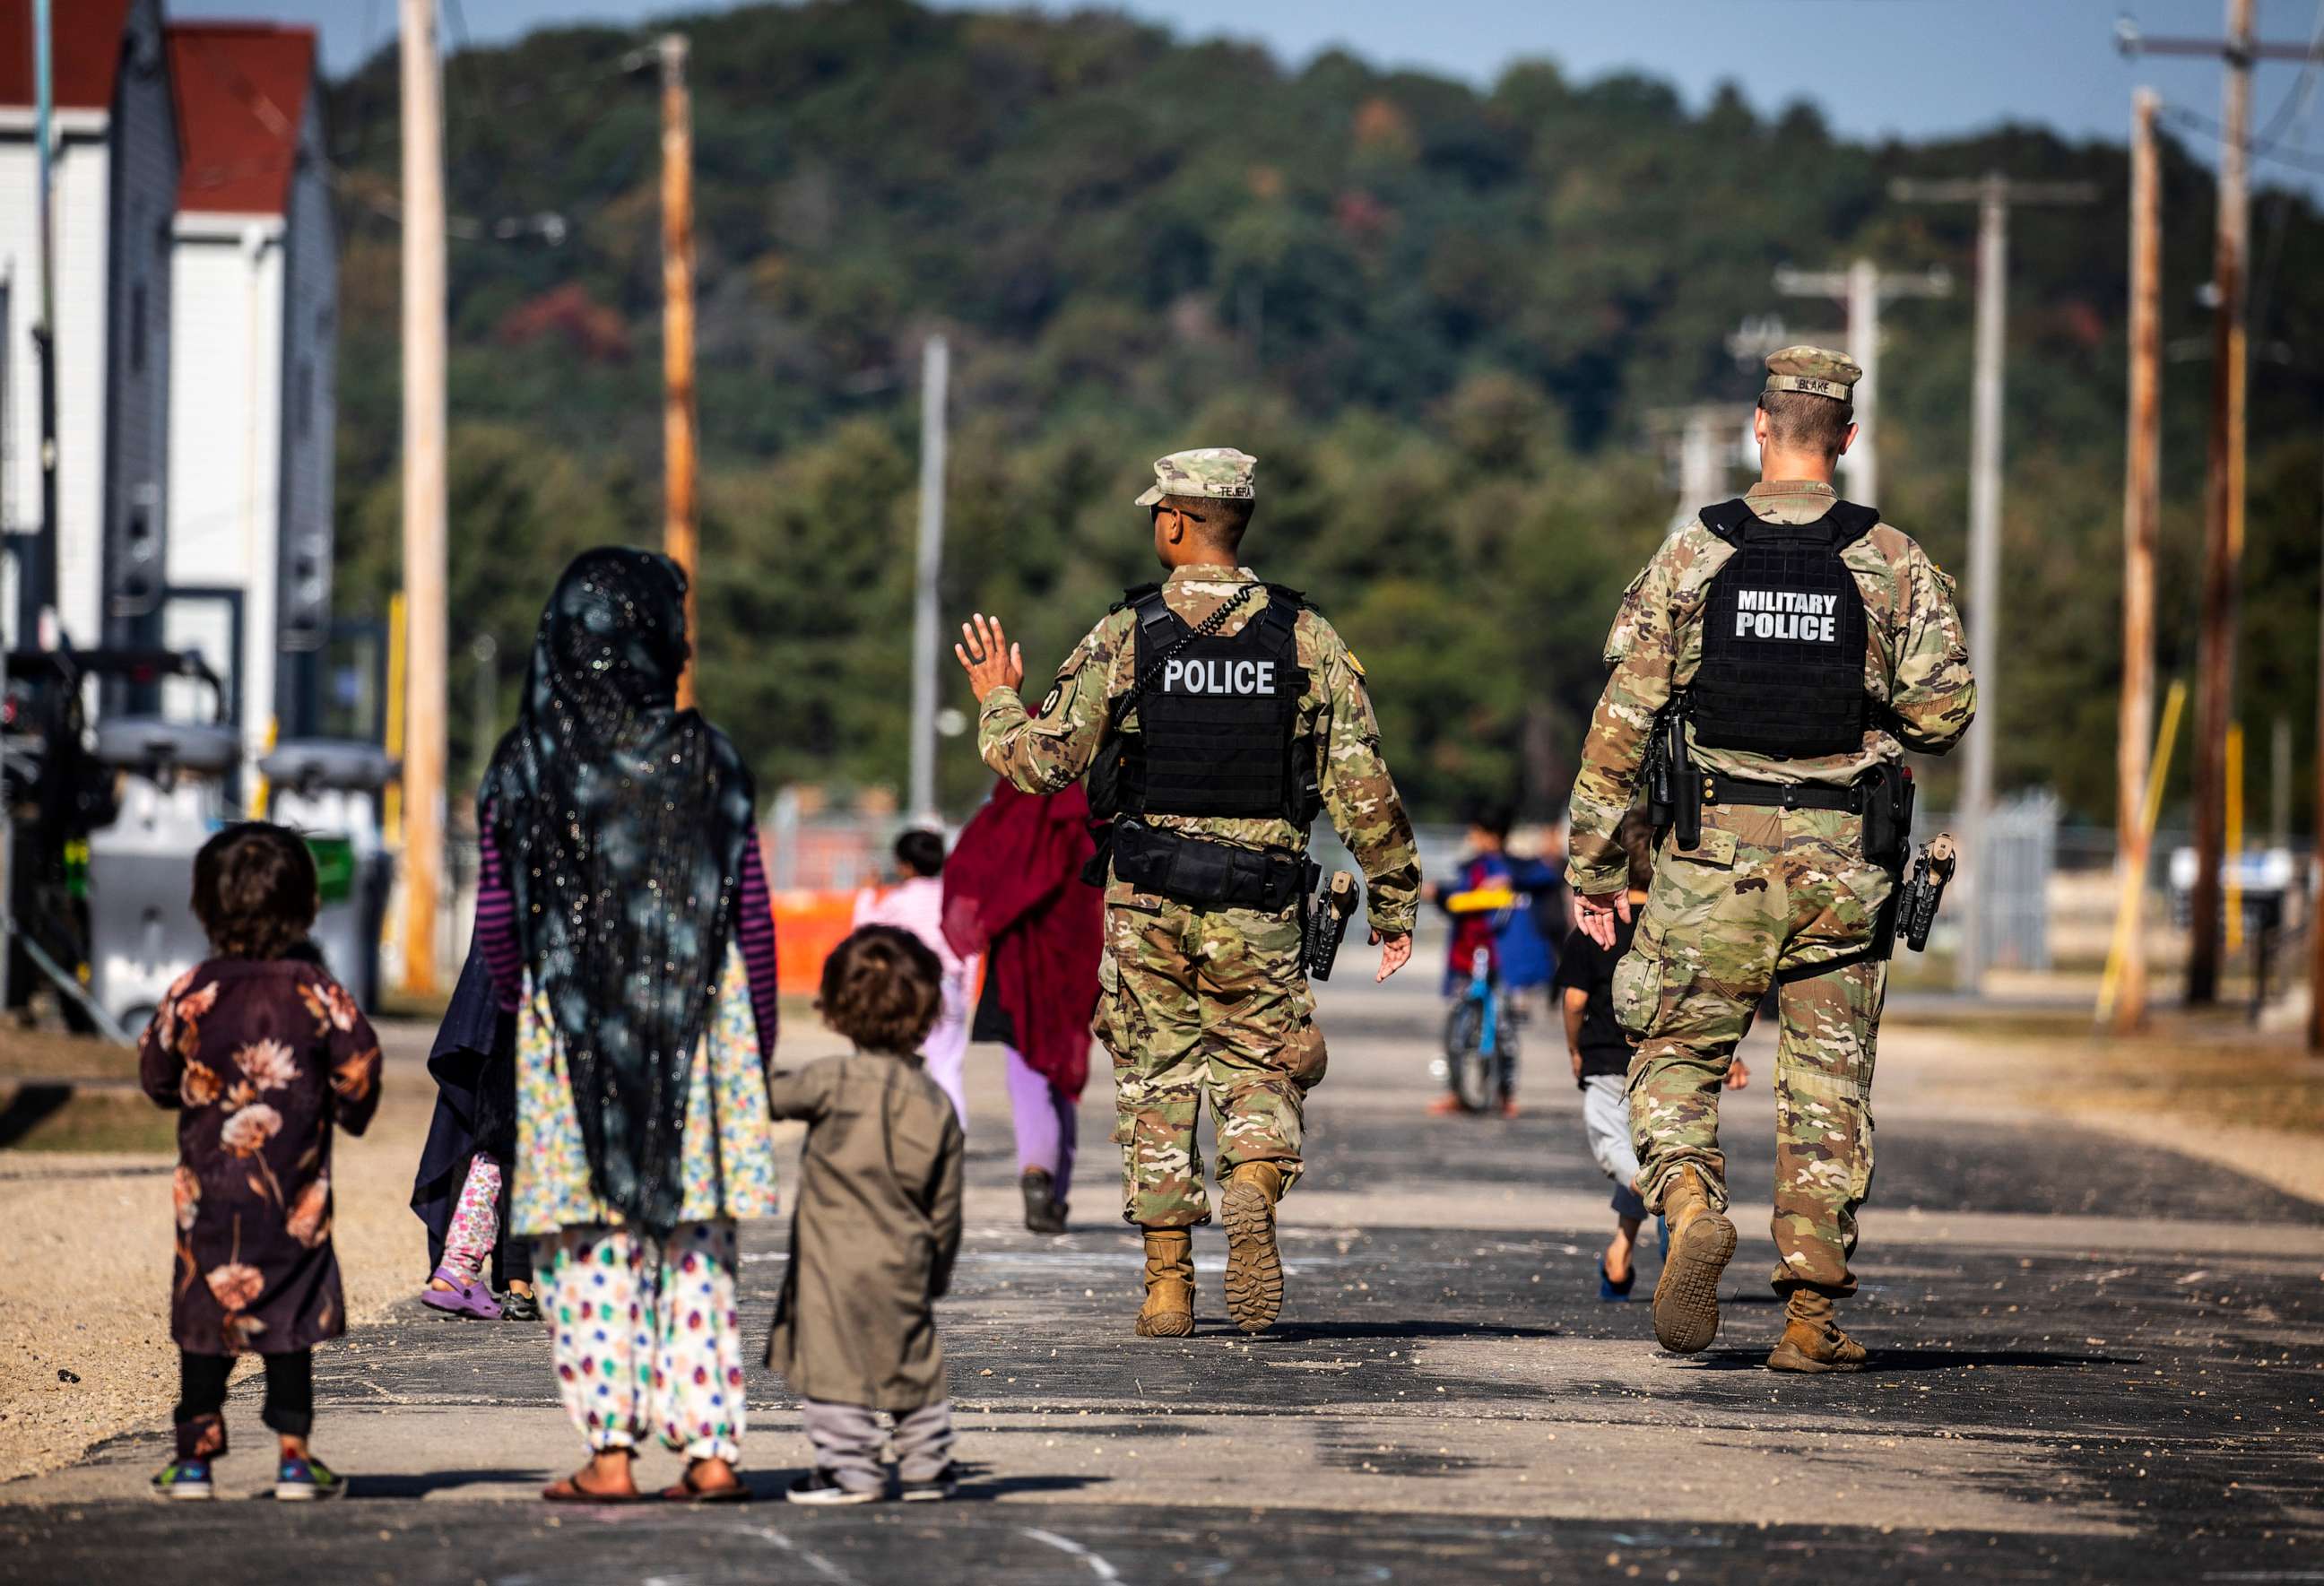 PHOTO: U.S. Military Police walk past Afghan refugees at the Village at the Ft. McCoy U.S. Army base on Sept. 30, 2021 in Ft. McCoy, Wis.